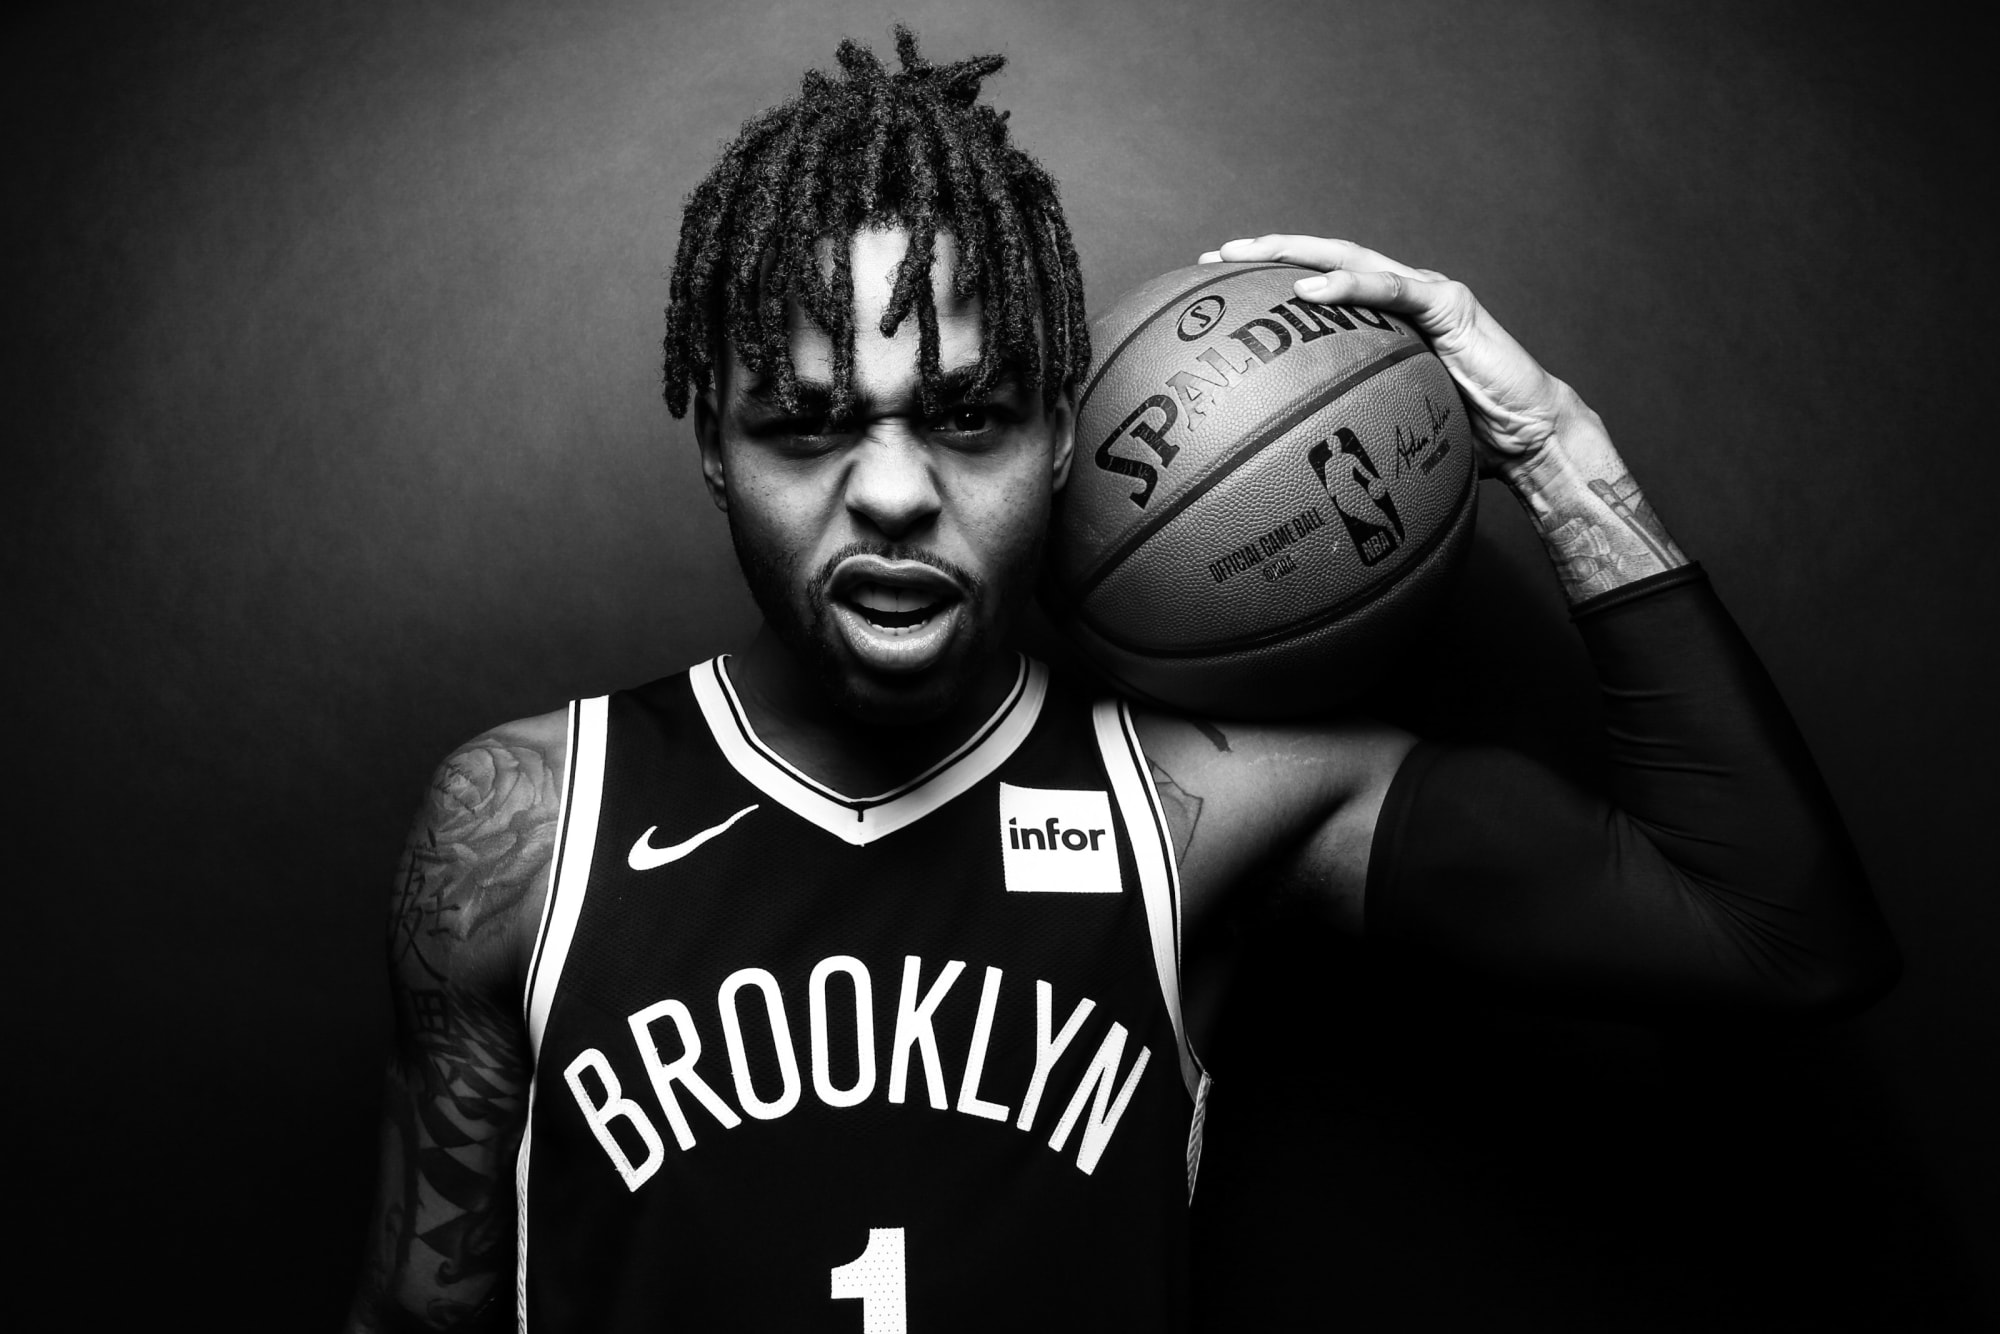 Brooklyn Nets: D'Angelo Russell staying is inevitable - Page 2